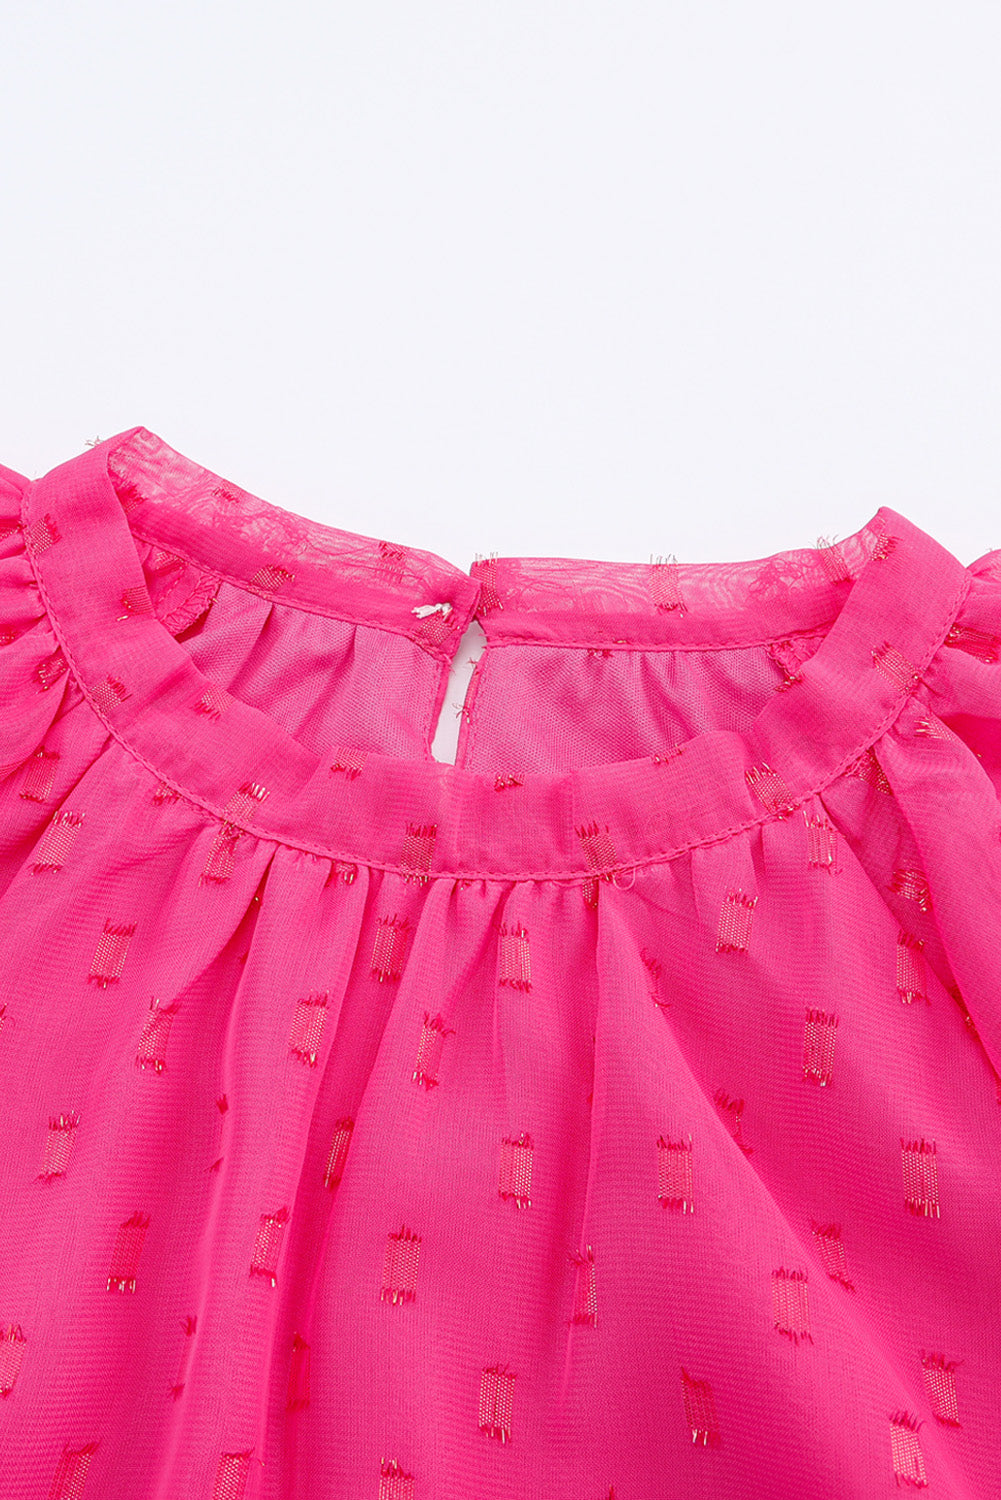 Rose Dotted Gold Stamp Tiered Ruffled Short Sleeve Top